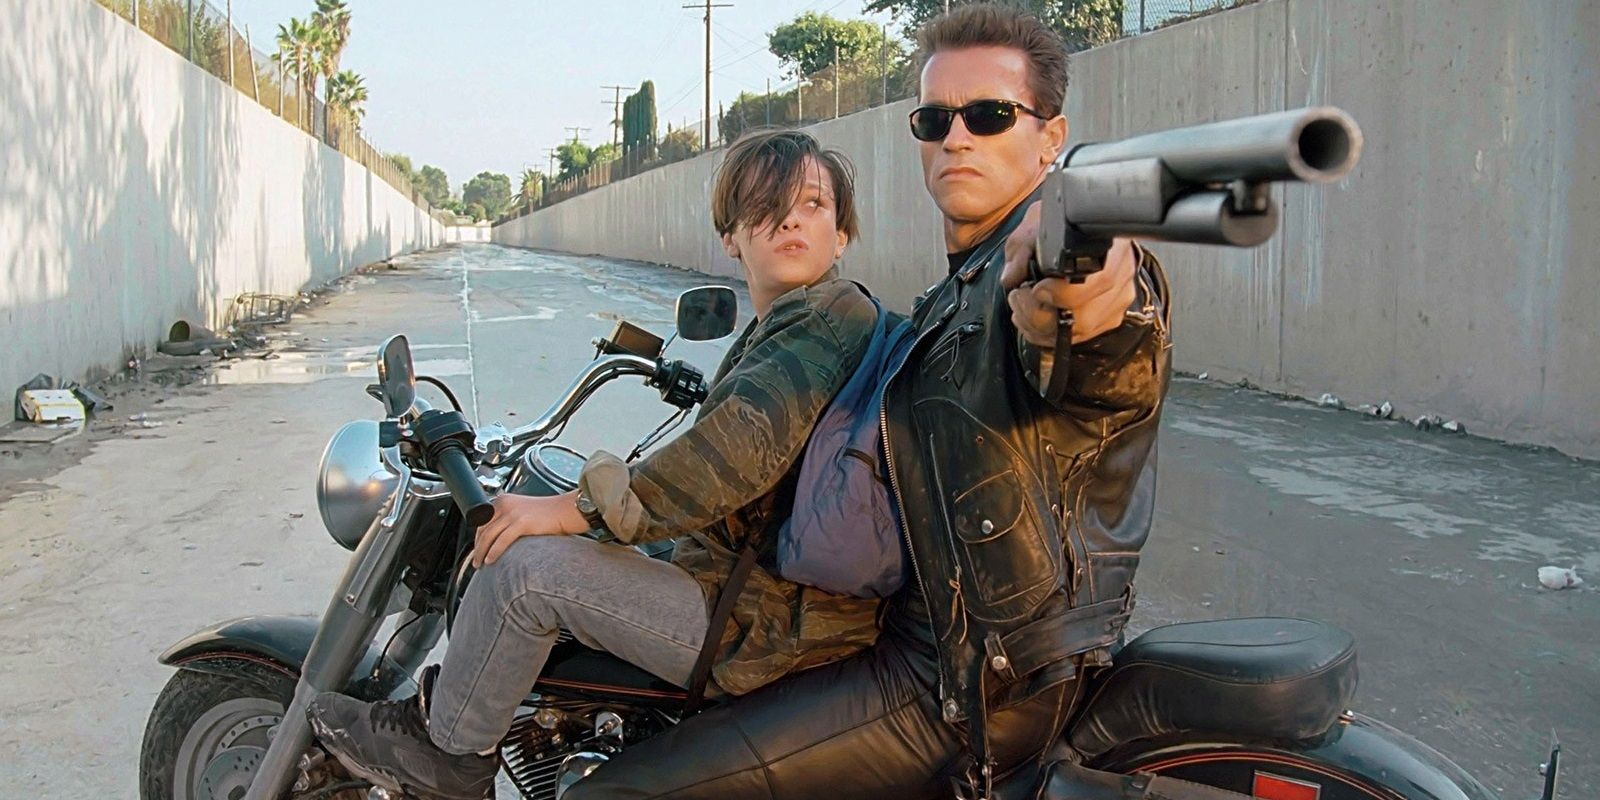 The T-800 and John Connor on a motorcycle with T-800 pointing a gun in Terminator 2 Judgment Day